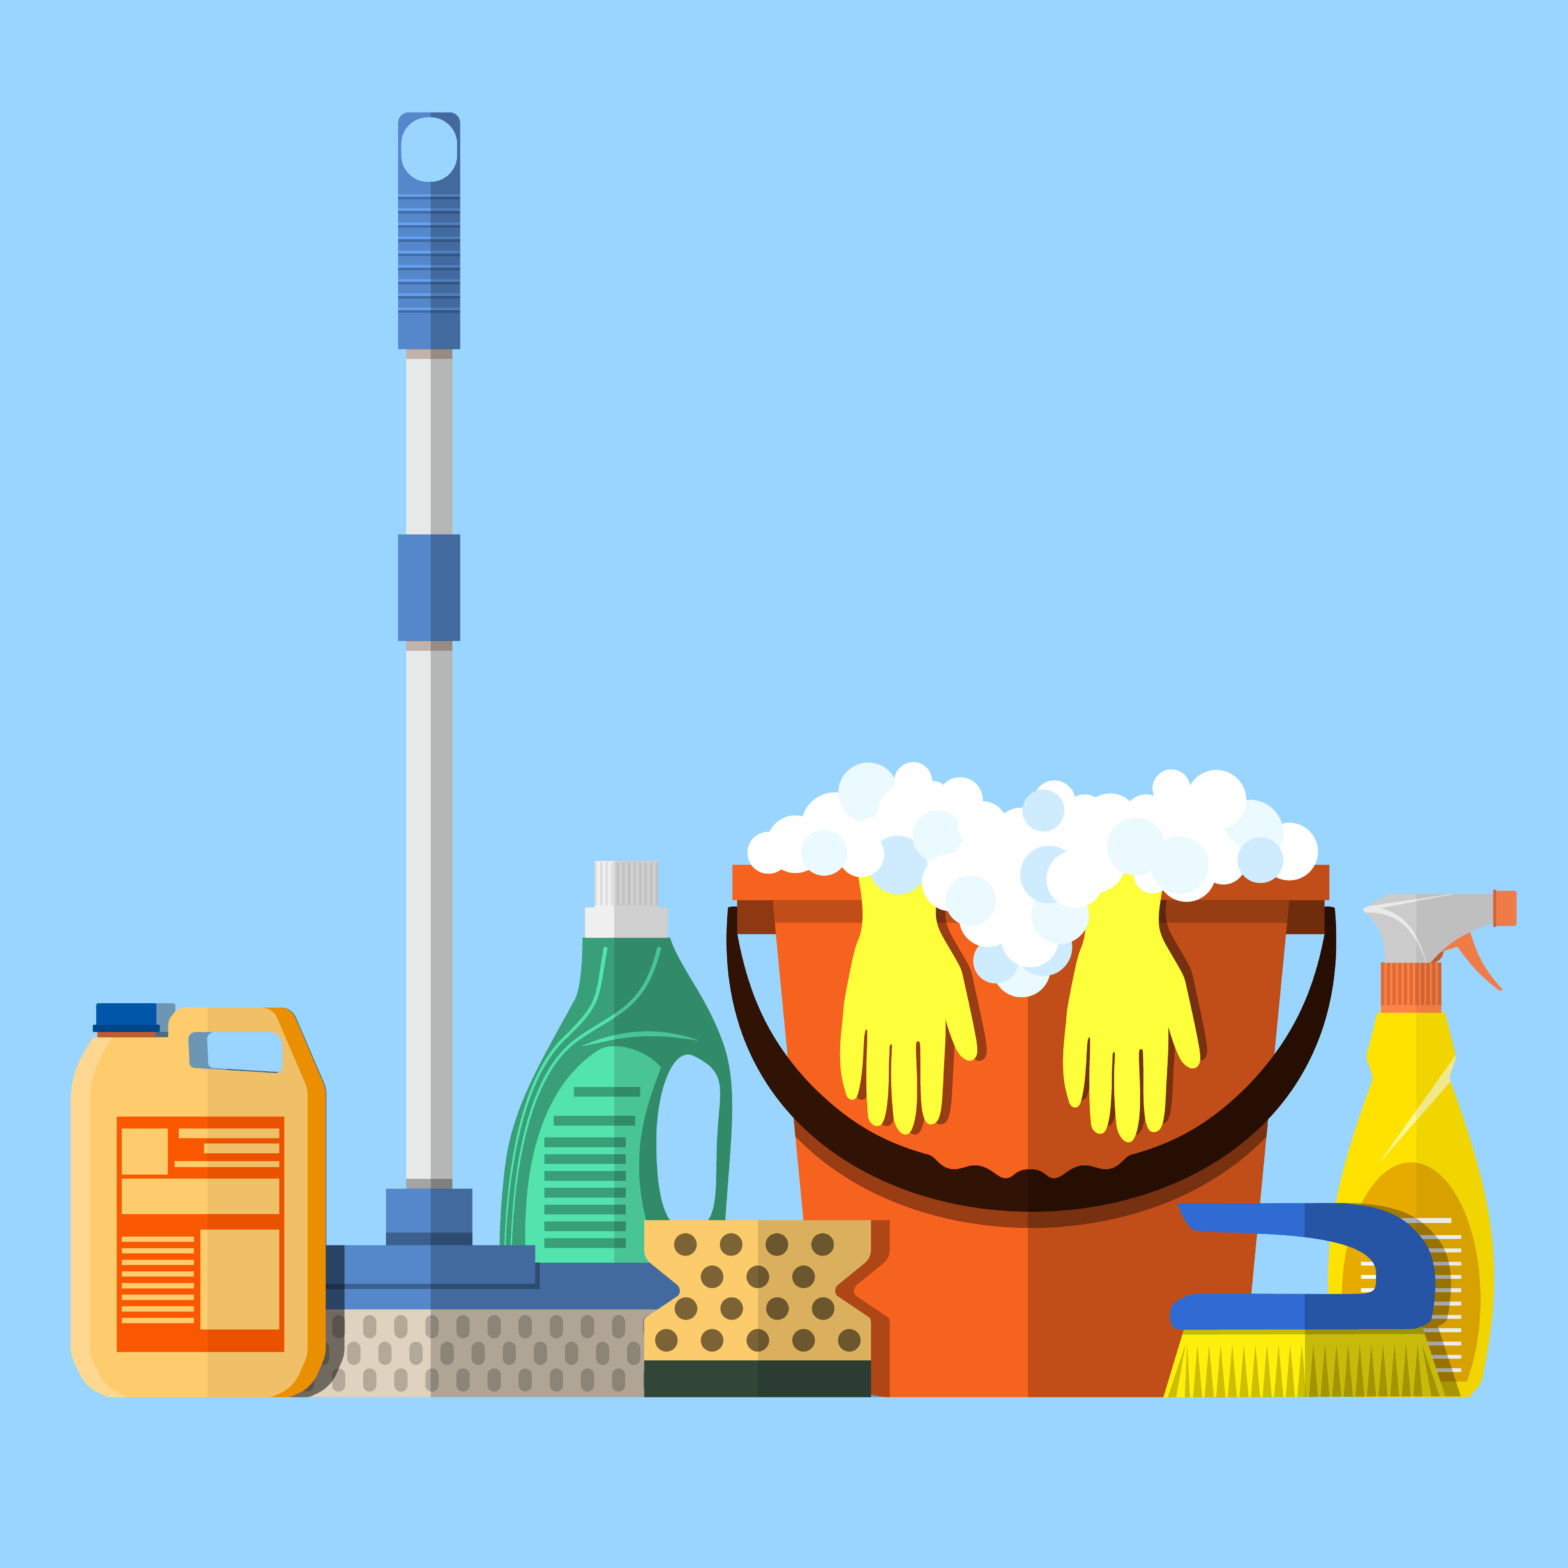 3 Tips To Start Your Spring Cleanup Of Your Website